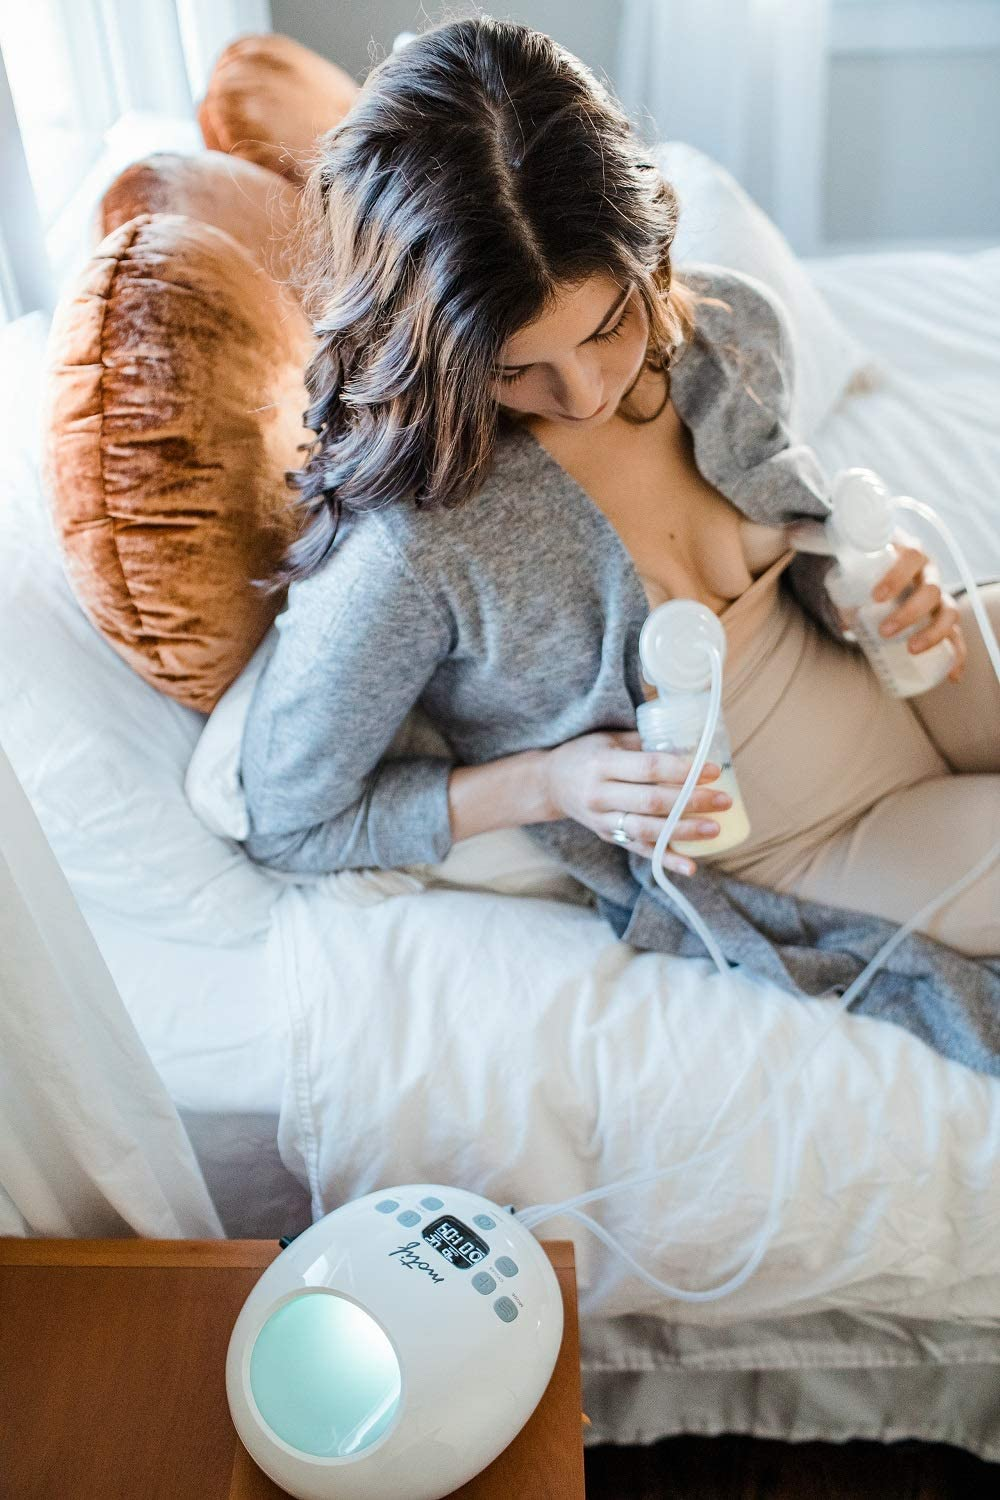 The best breast pumps, from electric to manual models